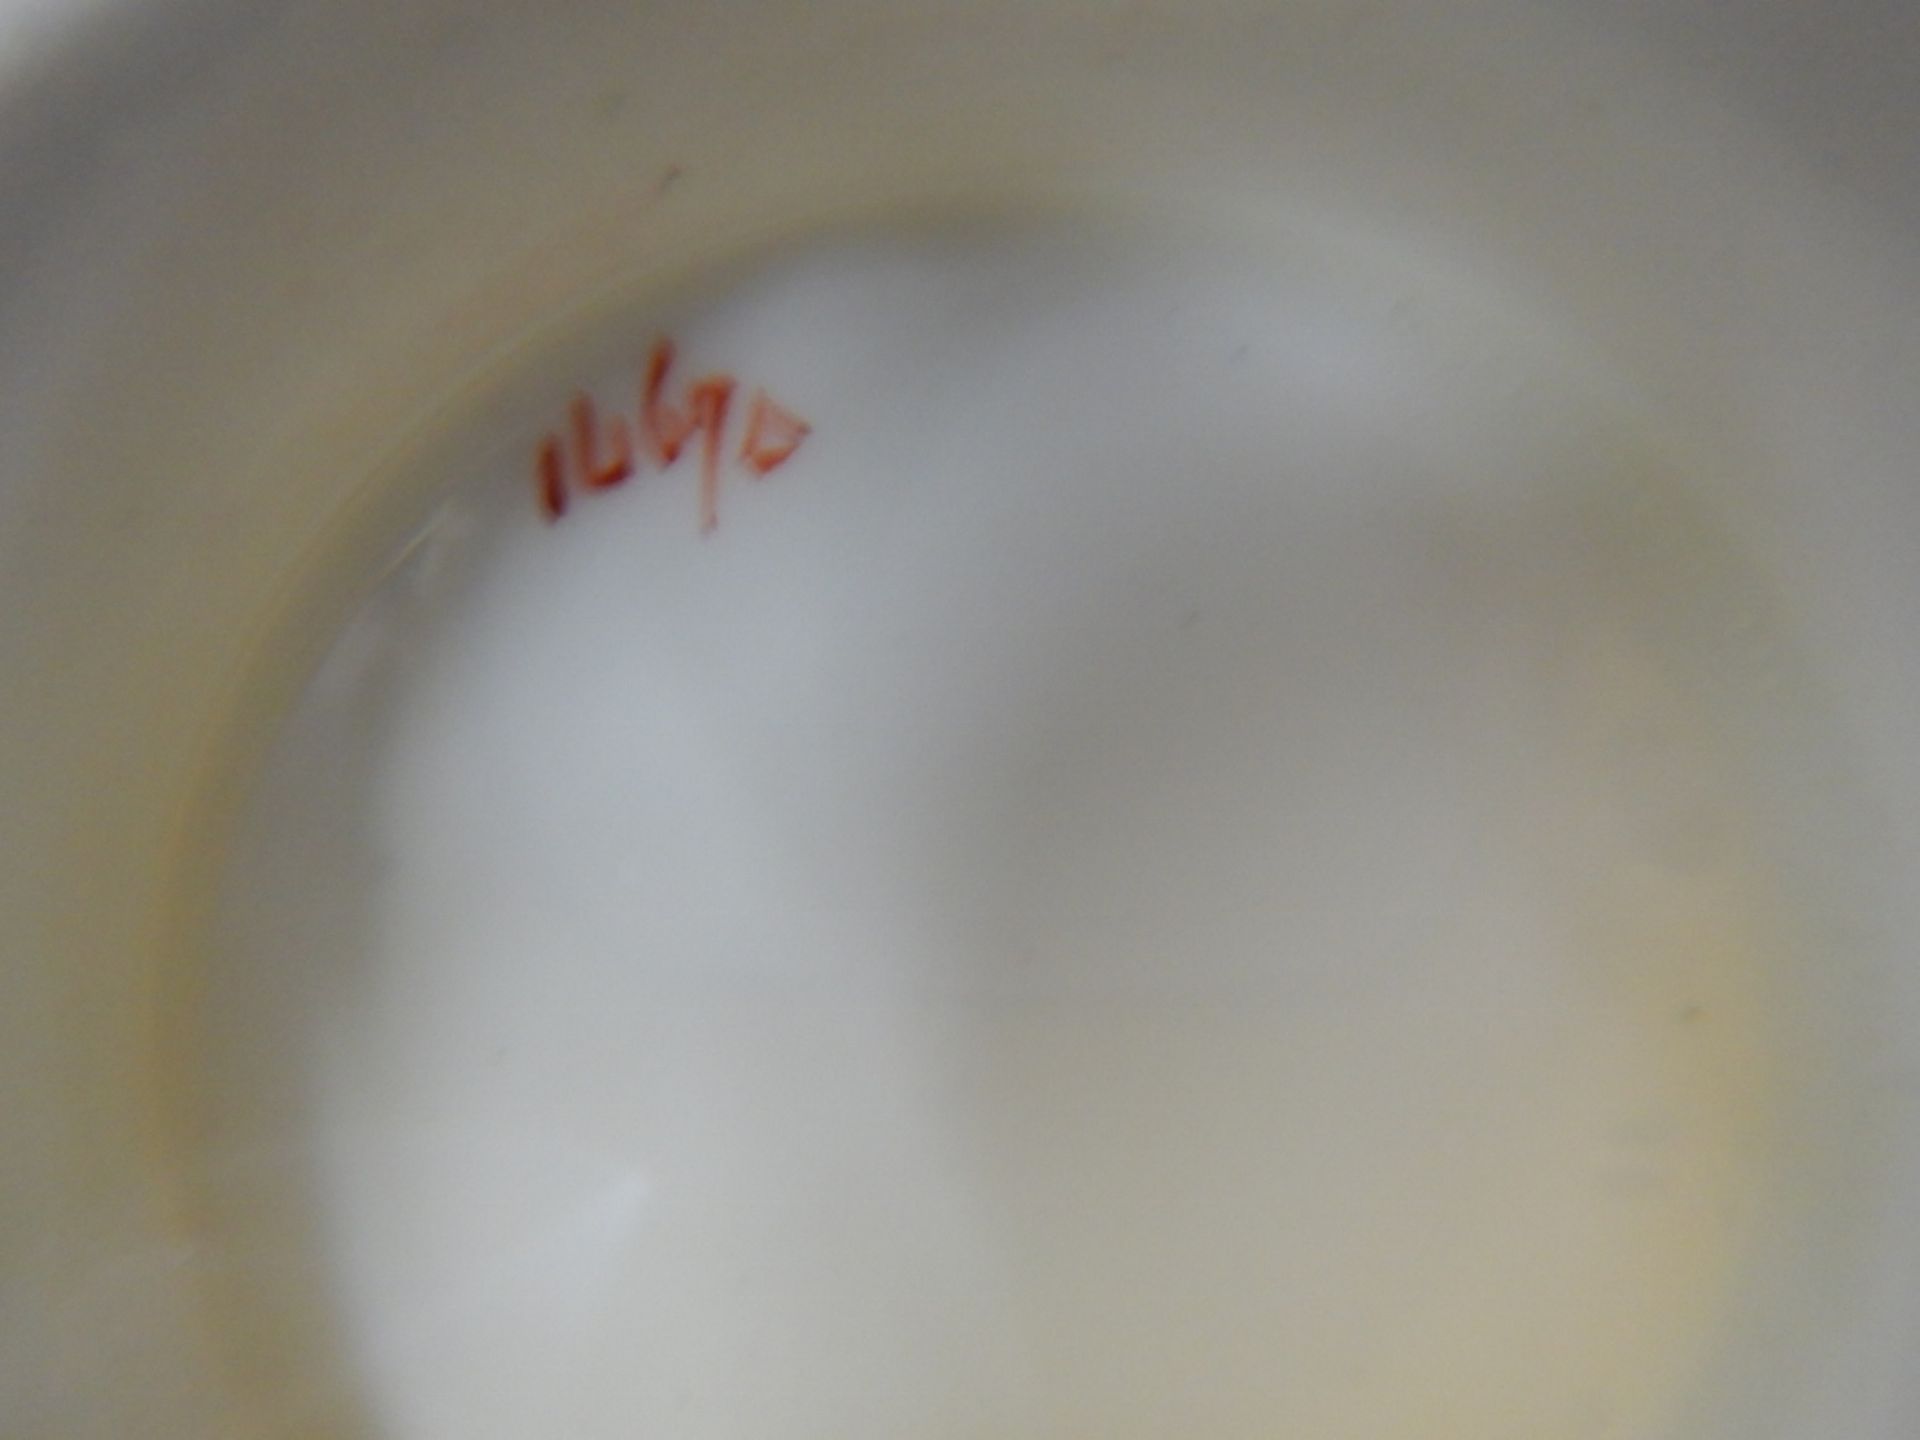 ANTIQUE TEACUP & SAUCER - FINE CHINA - VERY OLD #166/10 - Image 5 of 5